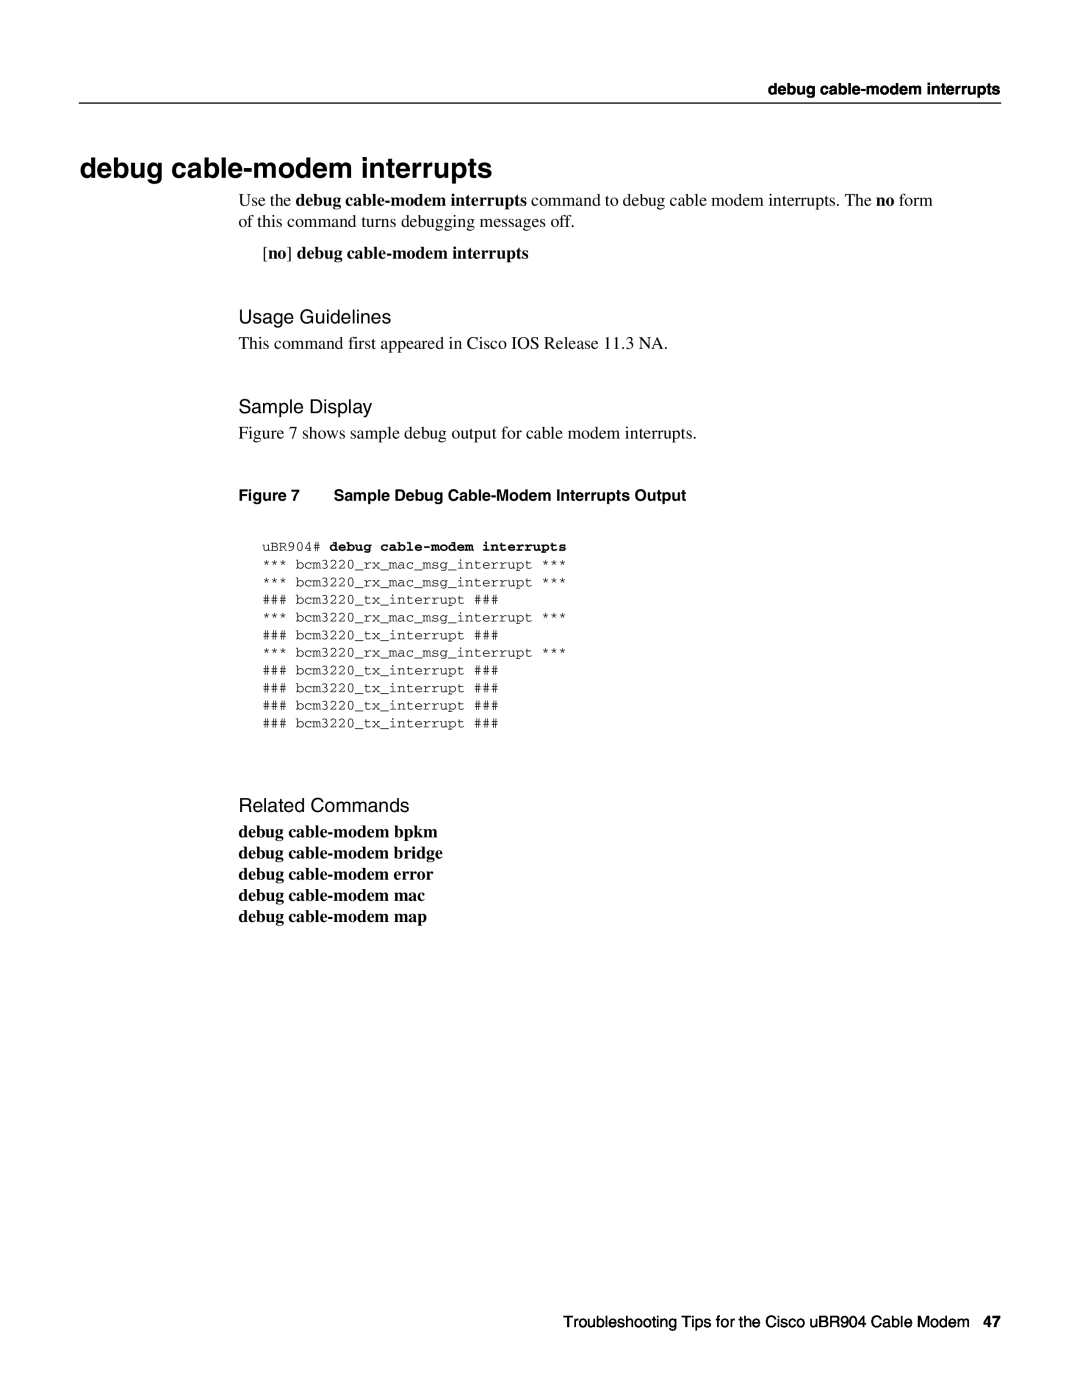 Cisco Systems UBR904 manual no debug cable-modem interrupts, Usage Guidelines, Sample Display, Related Commands 